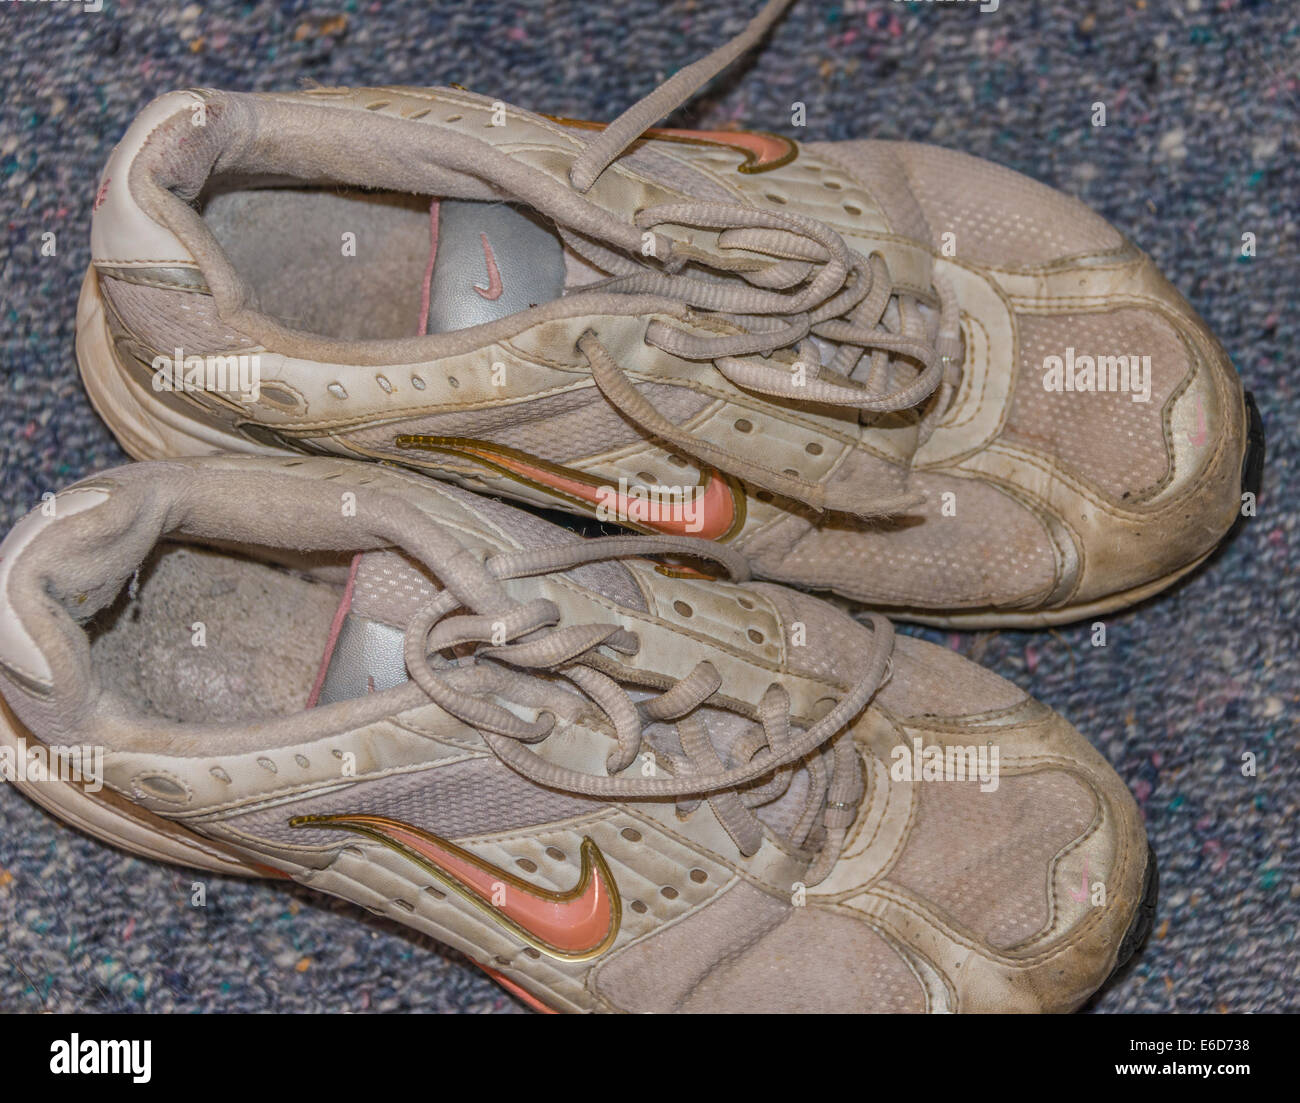 old nike tennis shoes